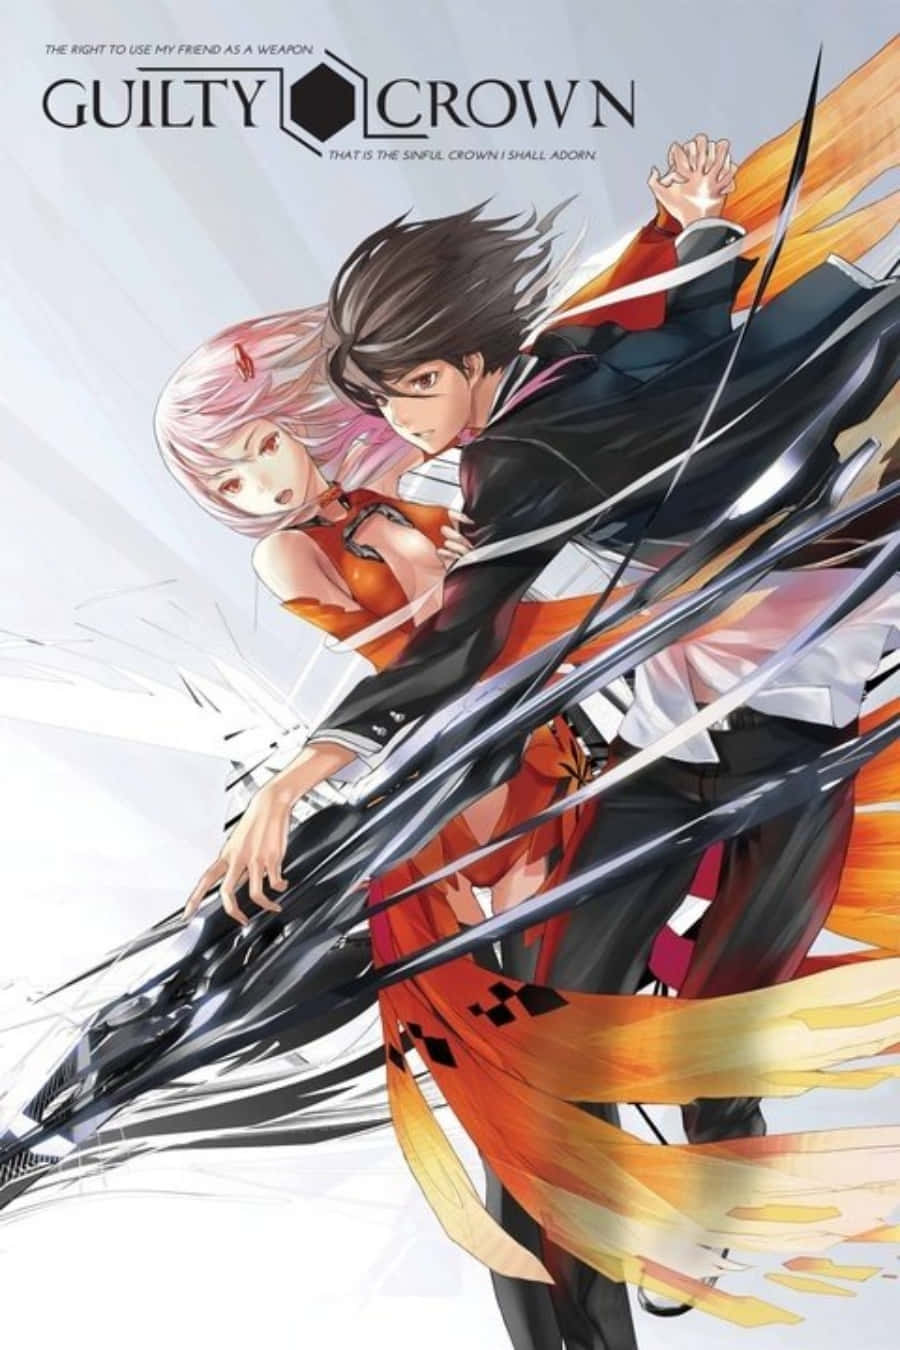 Follow in the footsteps of Shu and fight to save the world in Guilty Crown.